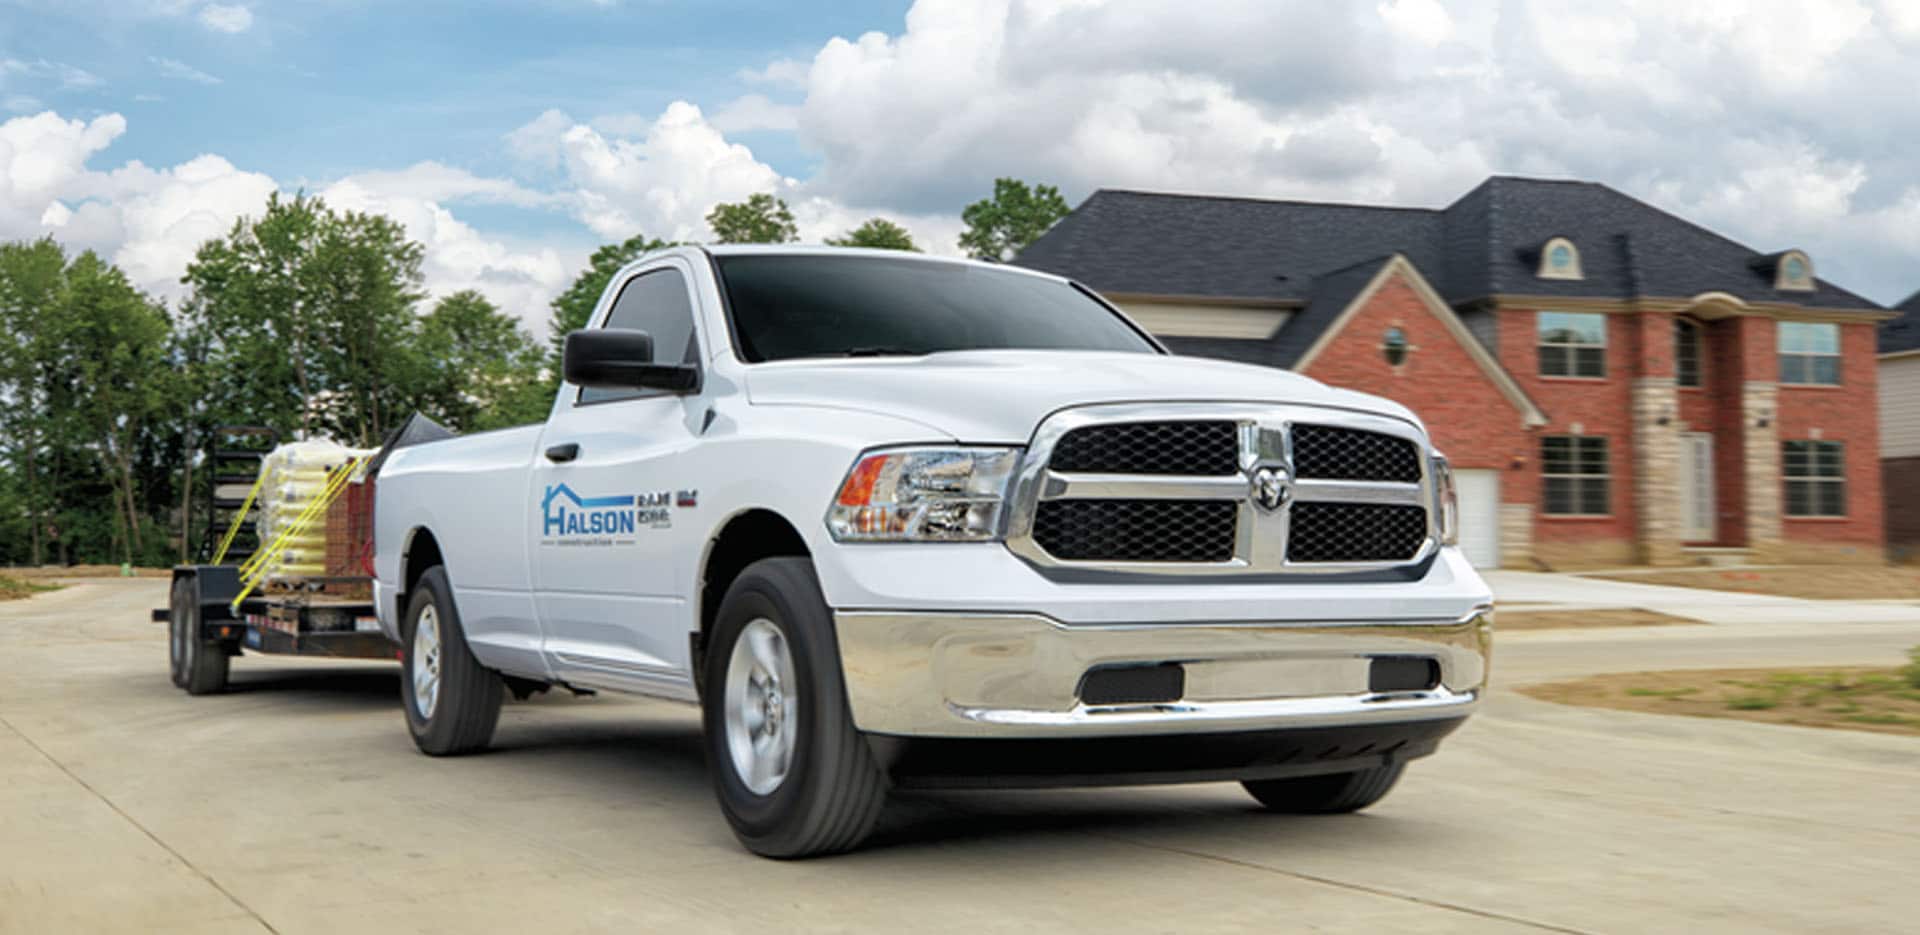 Display A white 2023 Ram 1500 Classic Tradesman Regular Cab with construction company signage on the passenger door, towing building materials as it is driven through a residential neighborhood.